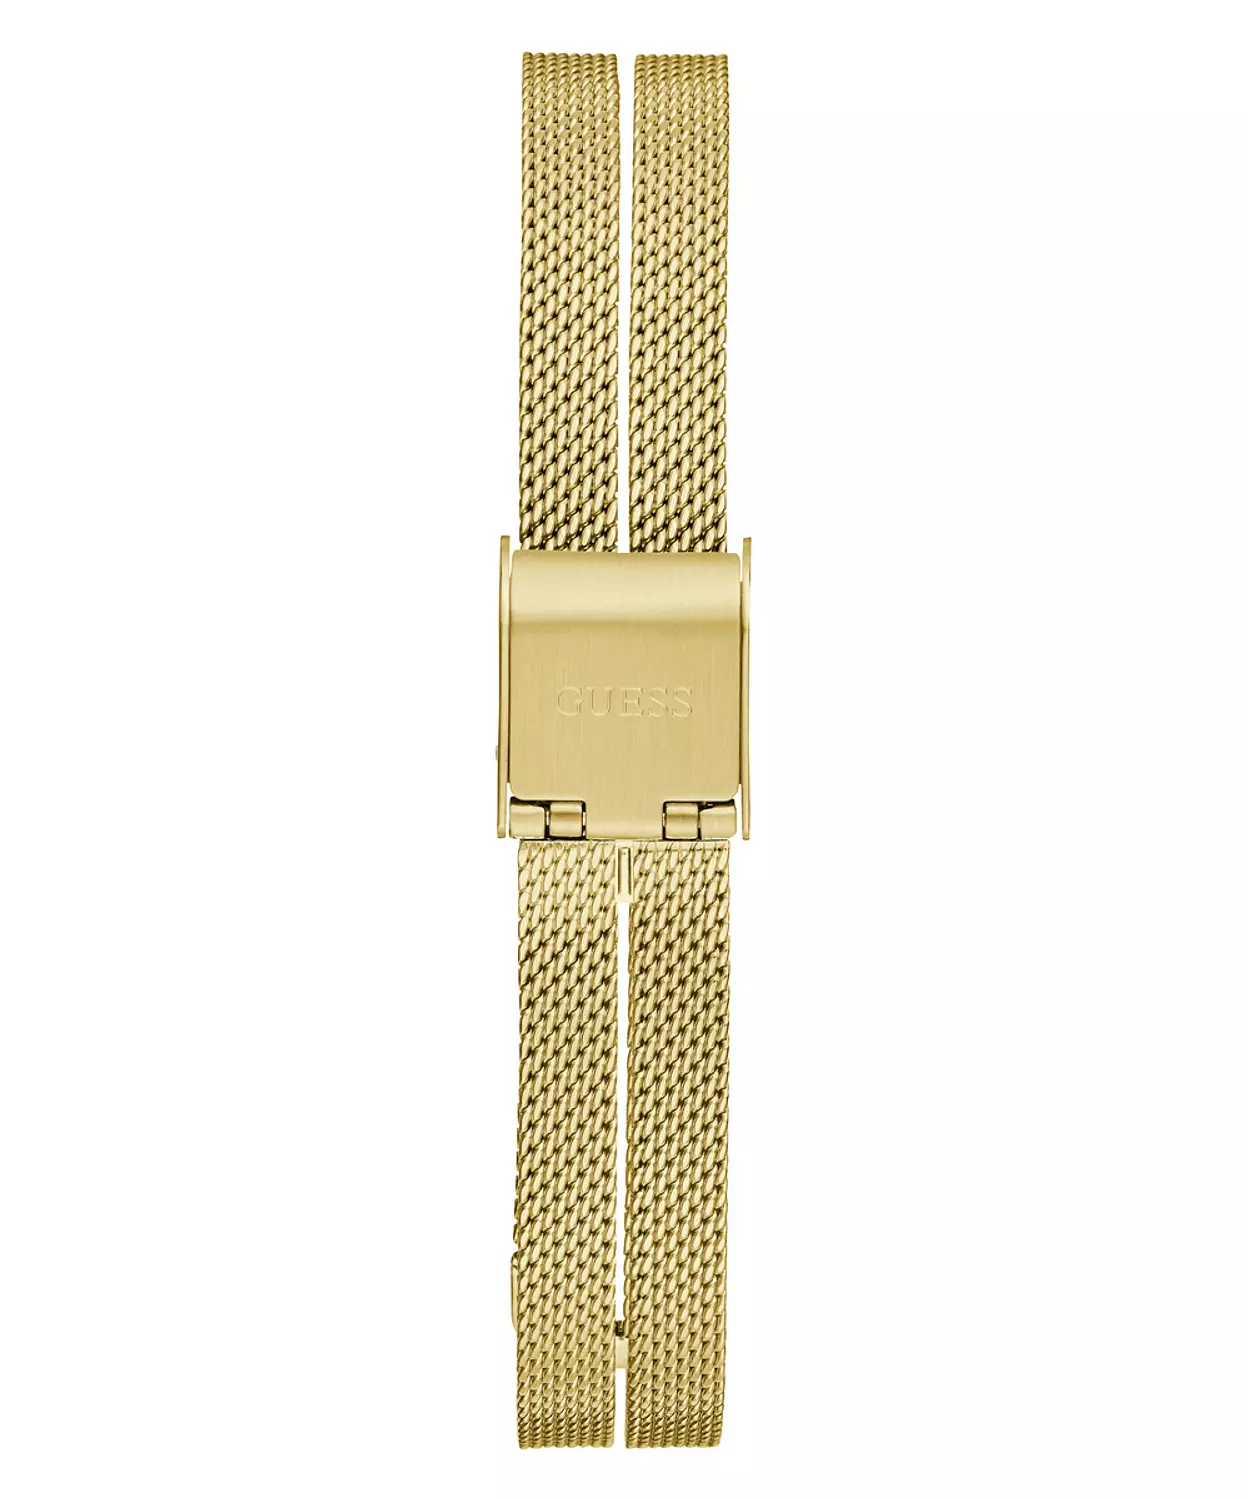 GUESS GW0471L2 ANALOG WATCH For Women Round Shape Gold Stainless Steel/Mesh Polished Bracelet 3